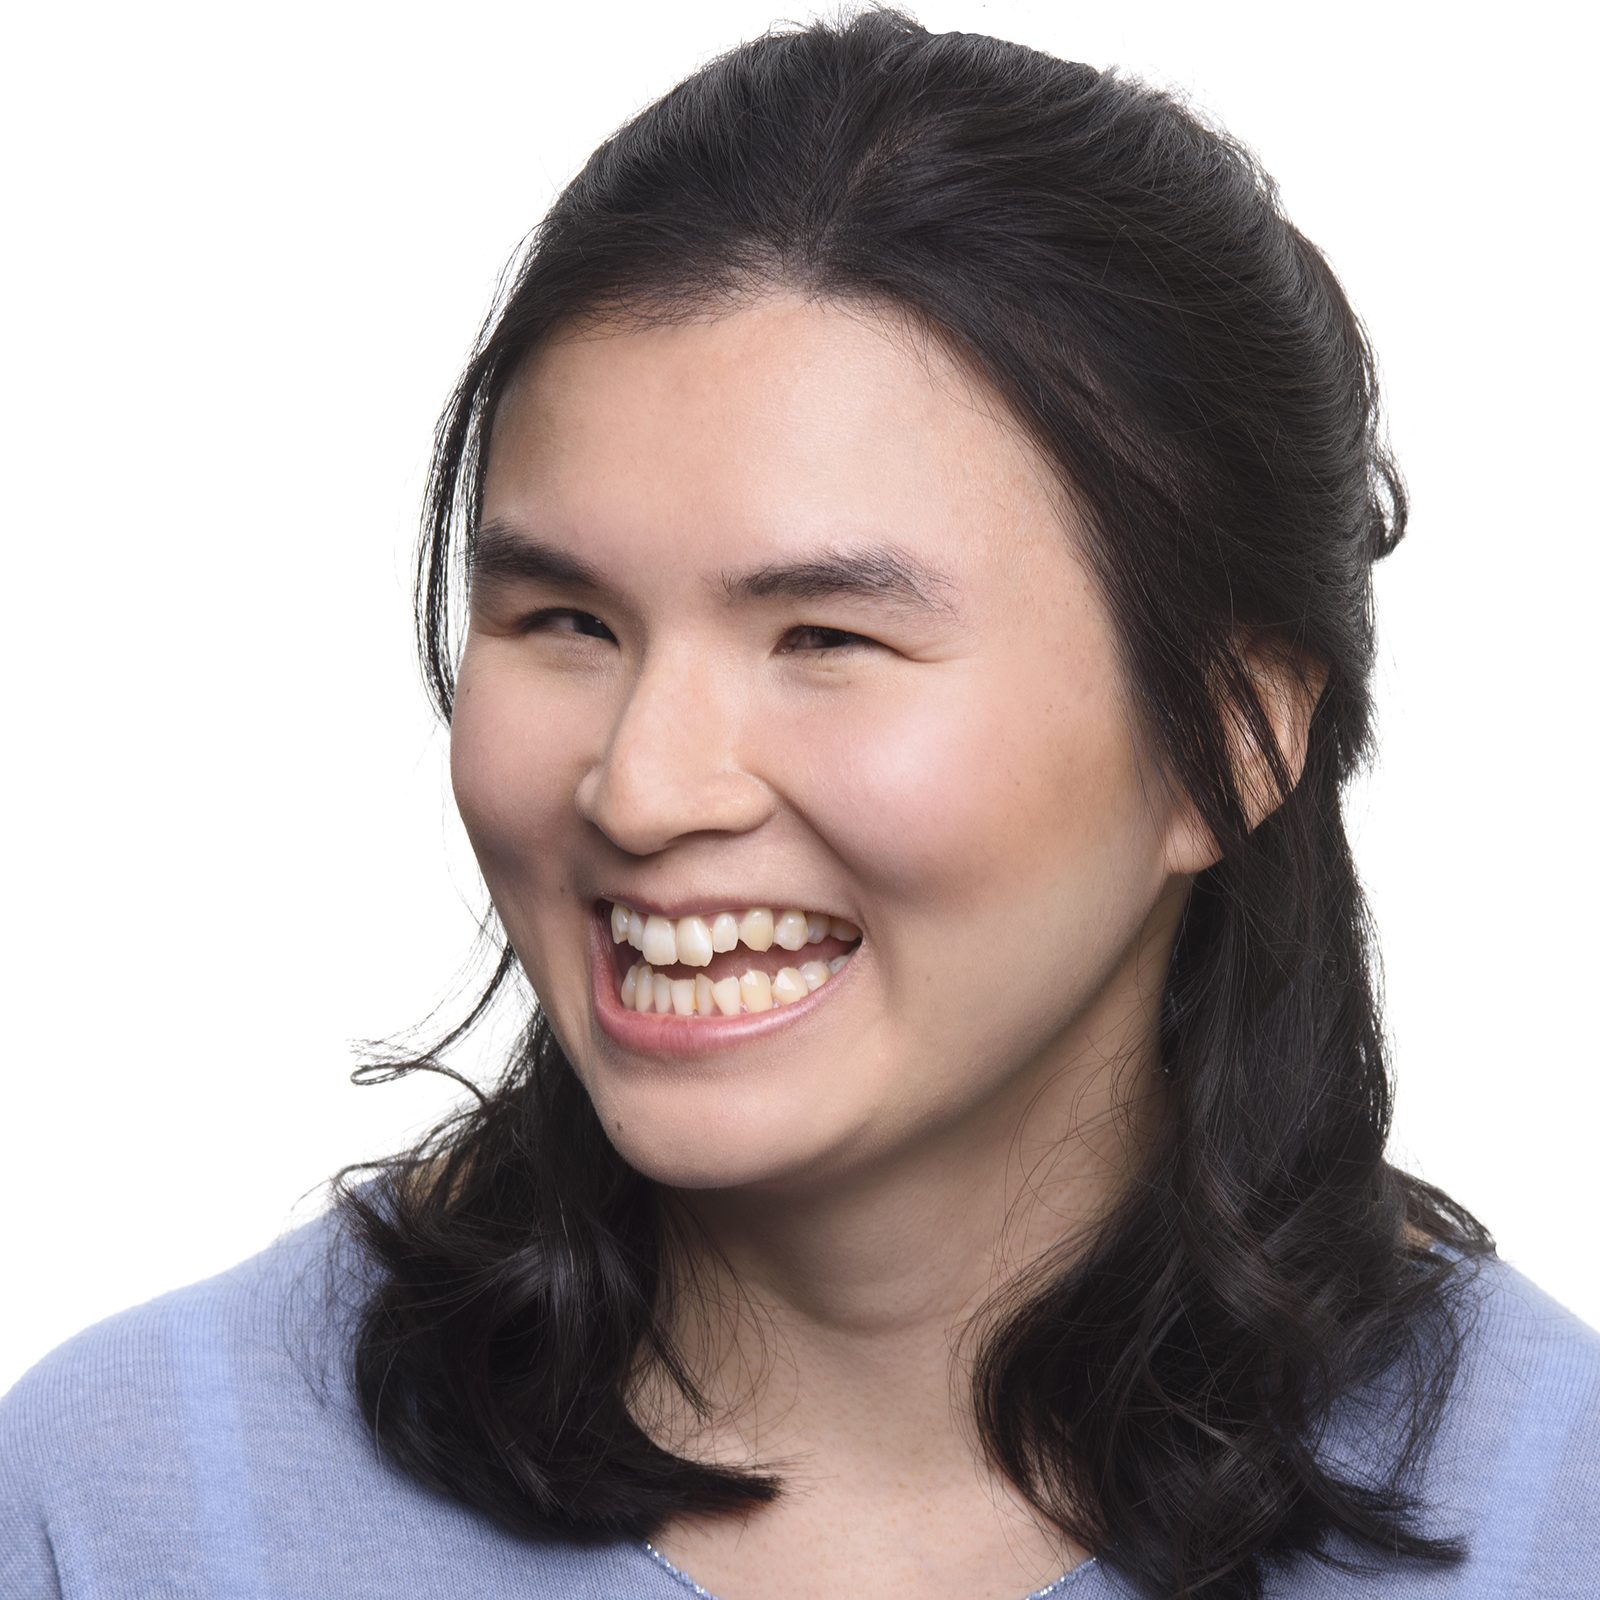 Headshot of Jasmin, a young Chinese Actress with long straight black hair. She is wearing a lilac top looking at the camera with a laughing smile.